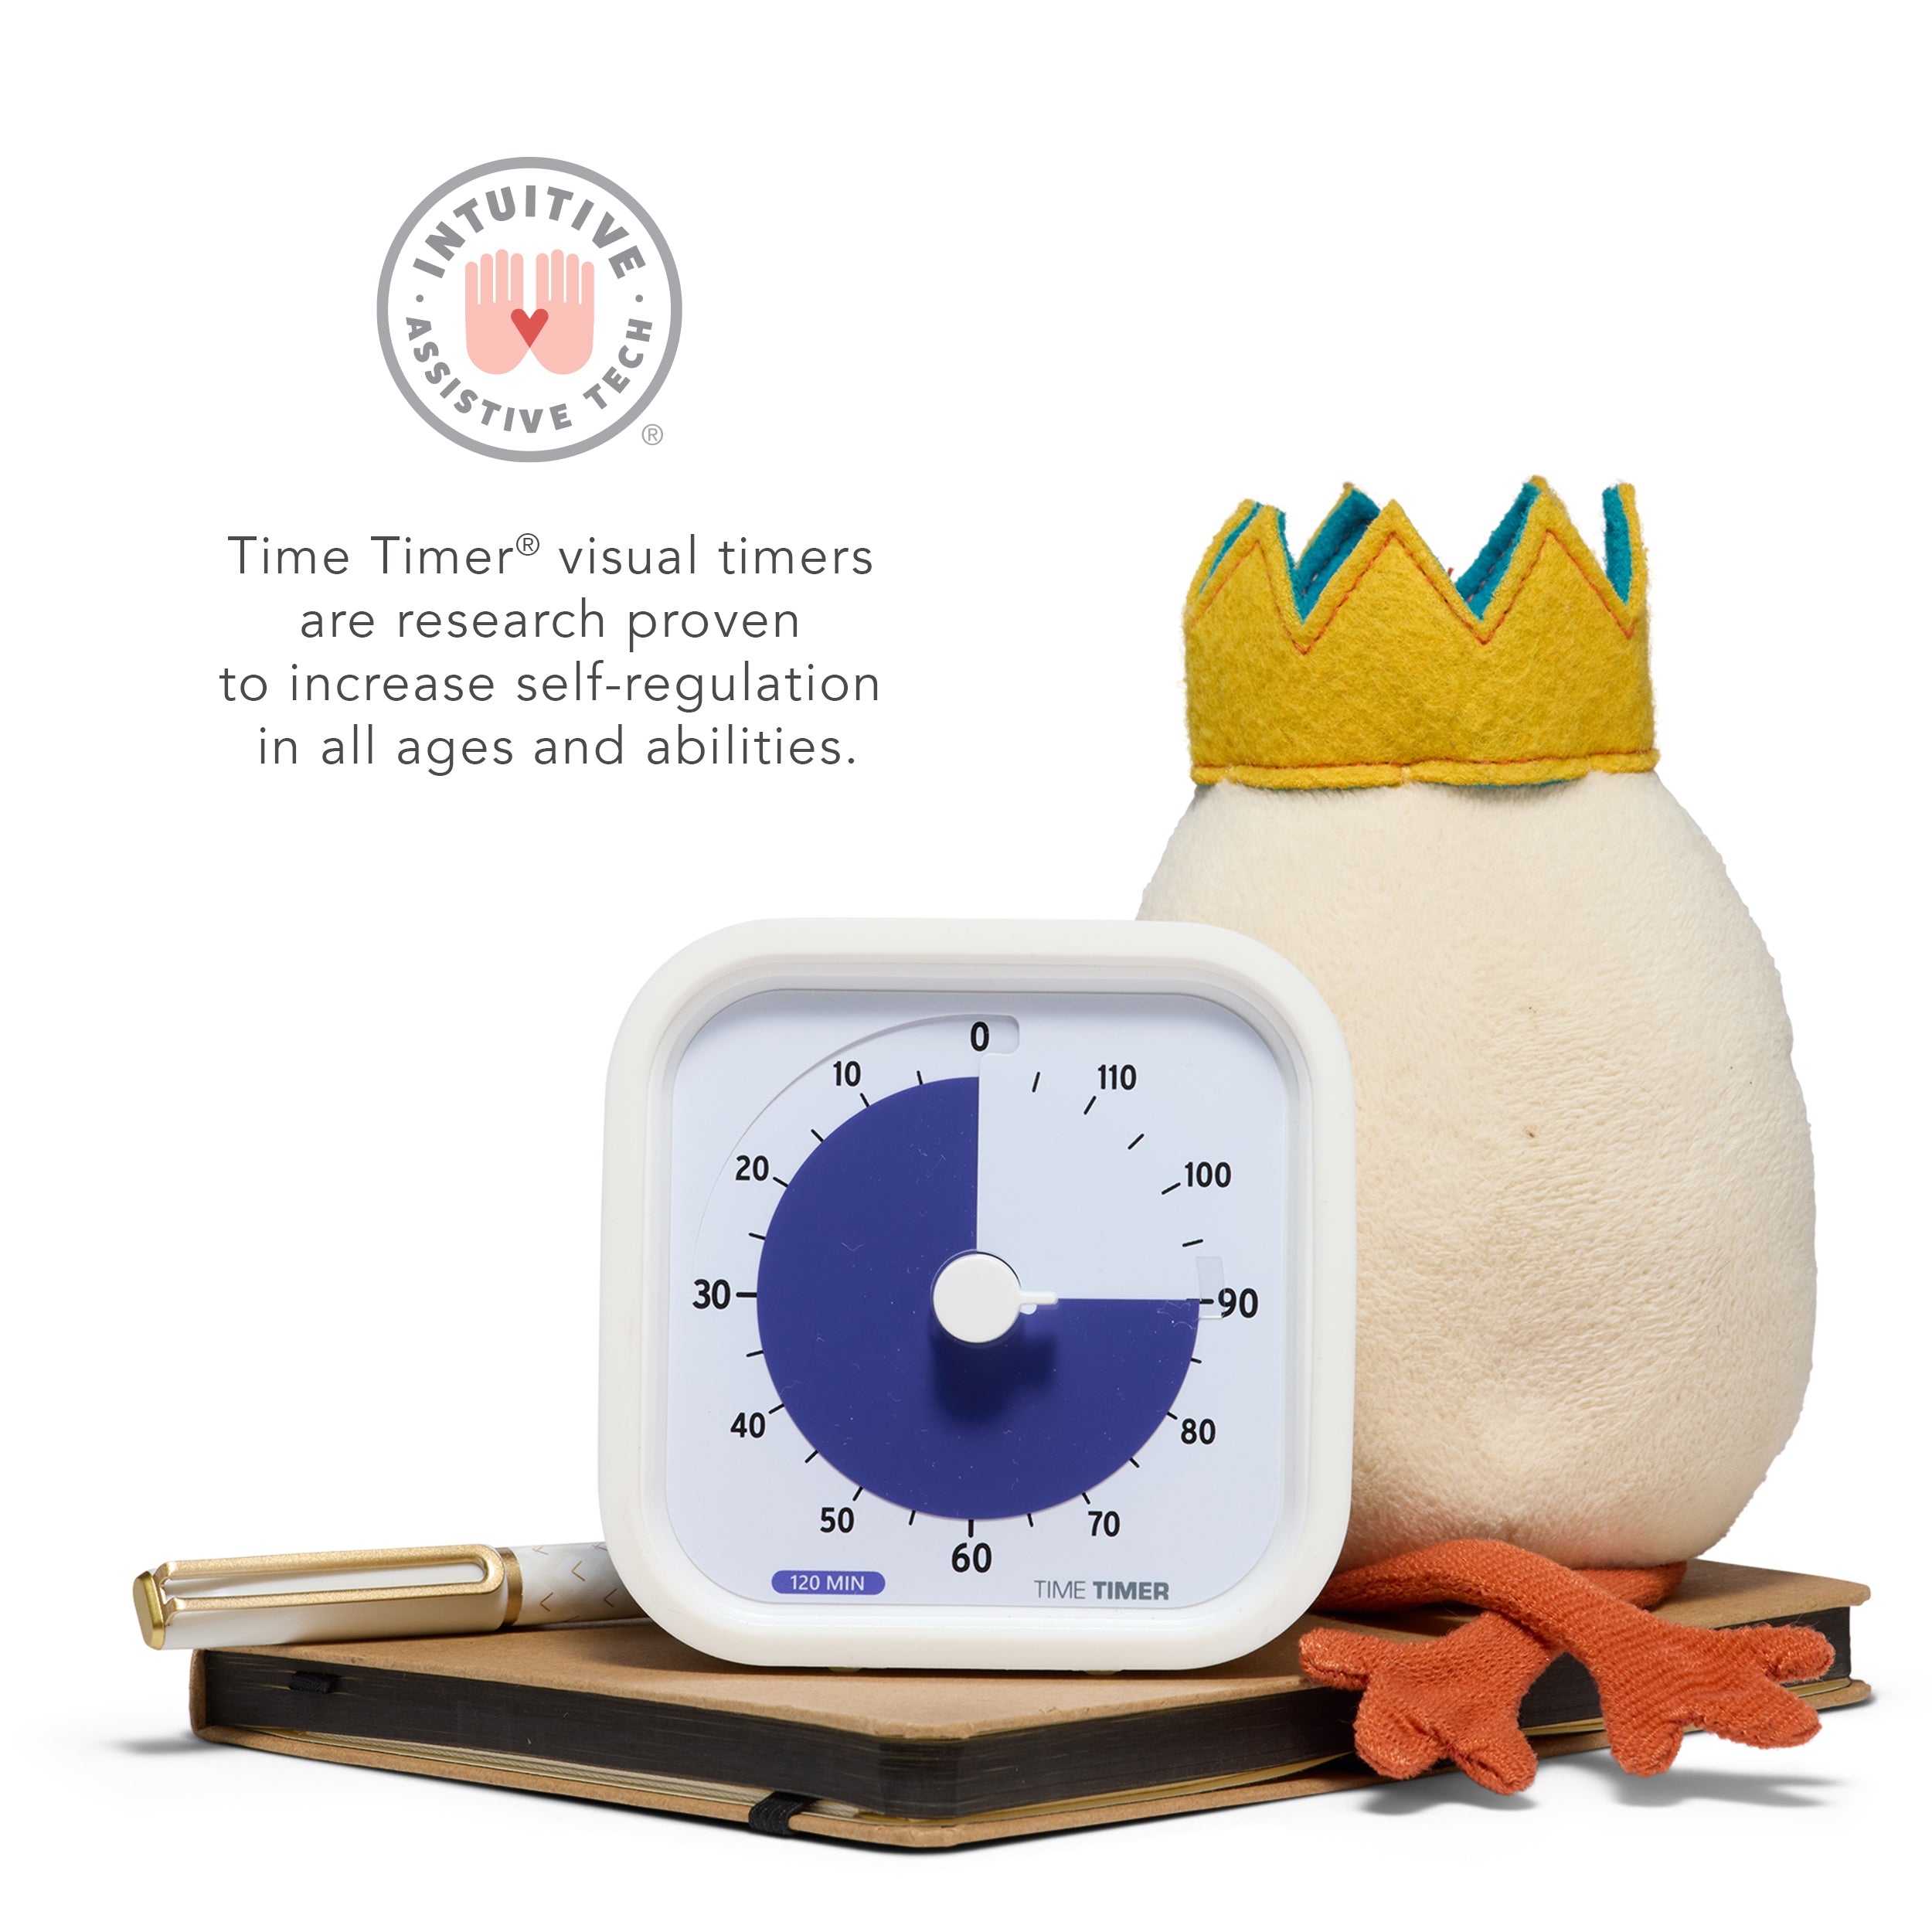 Time Timer visual timers are research proven to increase self-regulation in all ages and abilities. The MOD 120-minute timer us shown next to an Humpty Dumpty Egg toy and pen sitting atop a notebook. 